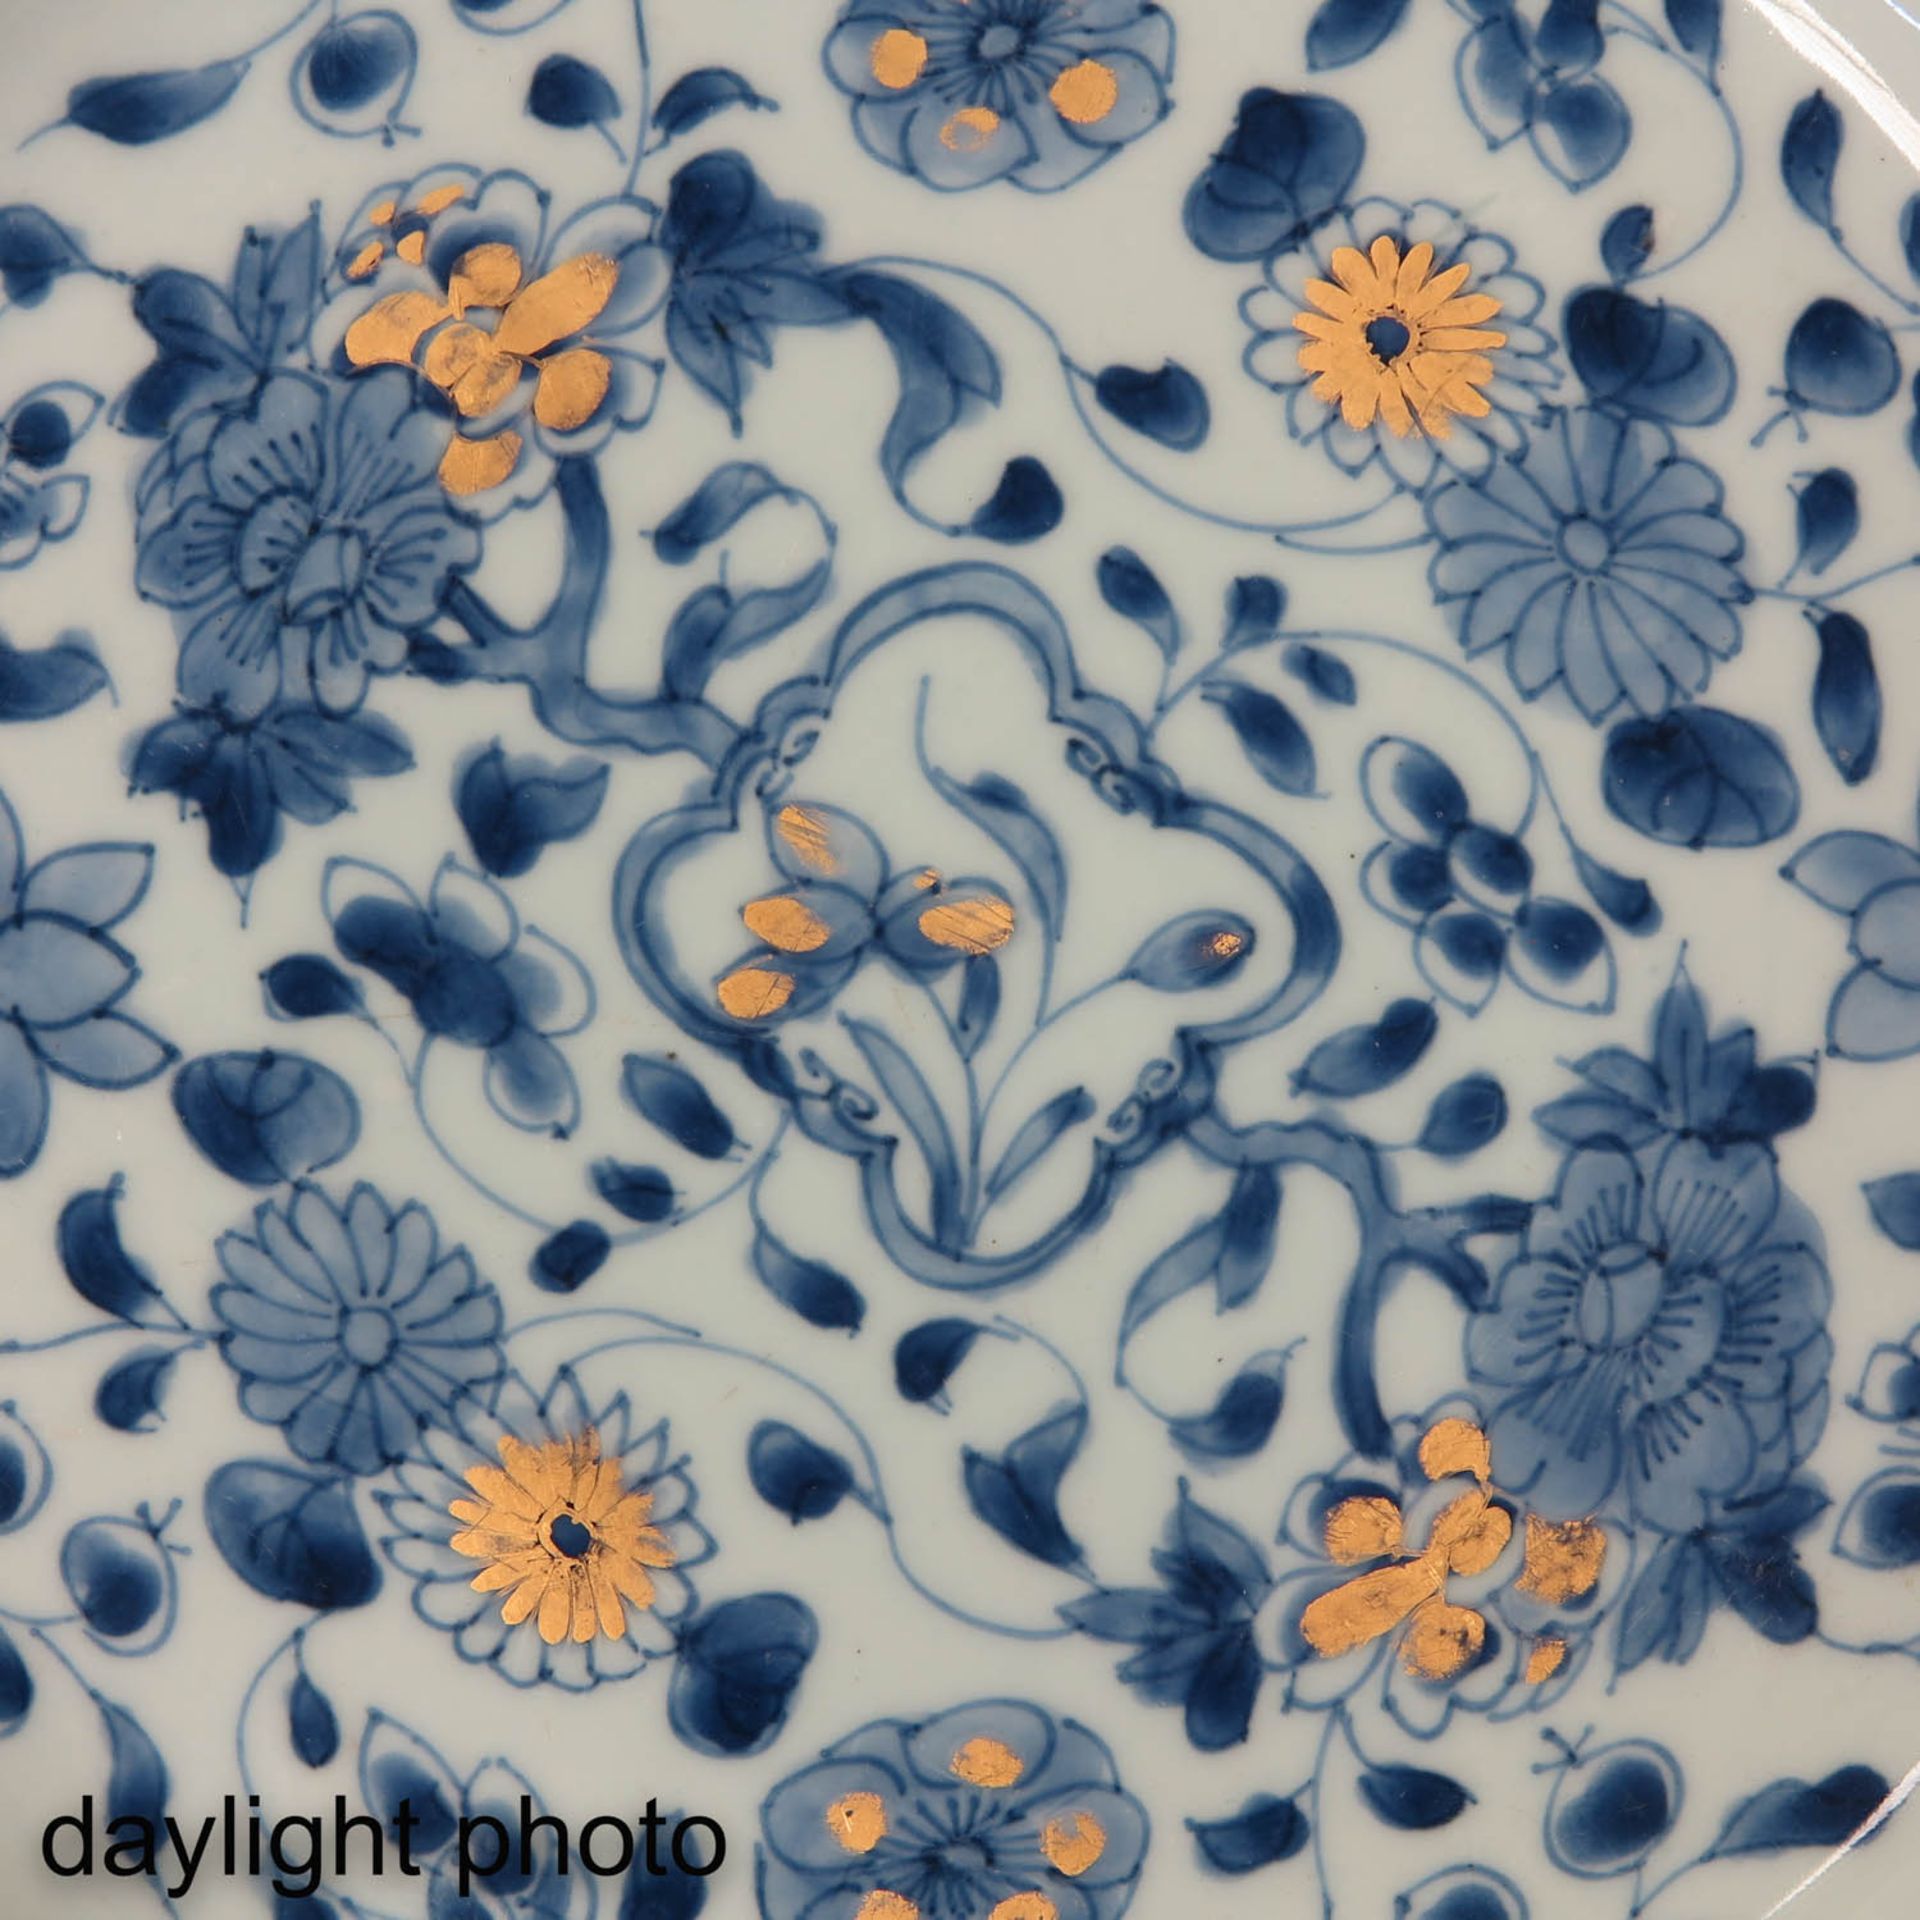 A Blue and Gilt Floral Decor Plates - Image 5 of 5